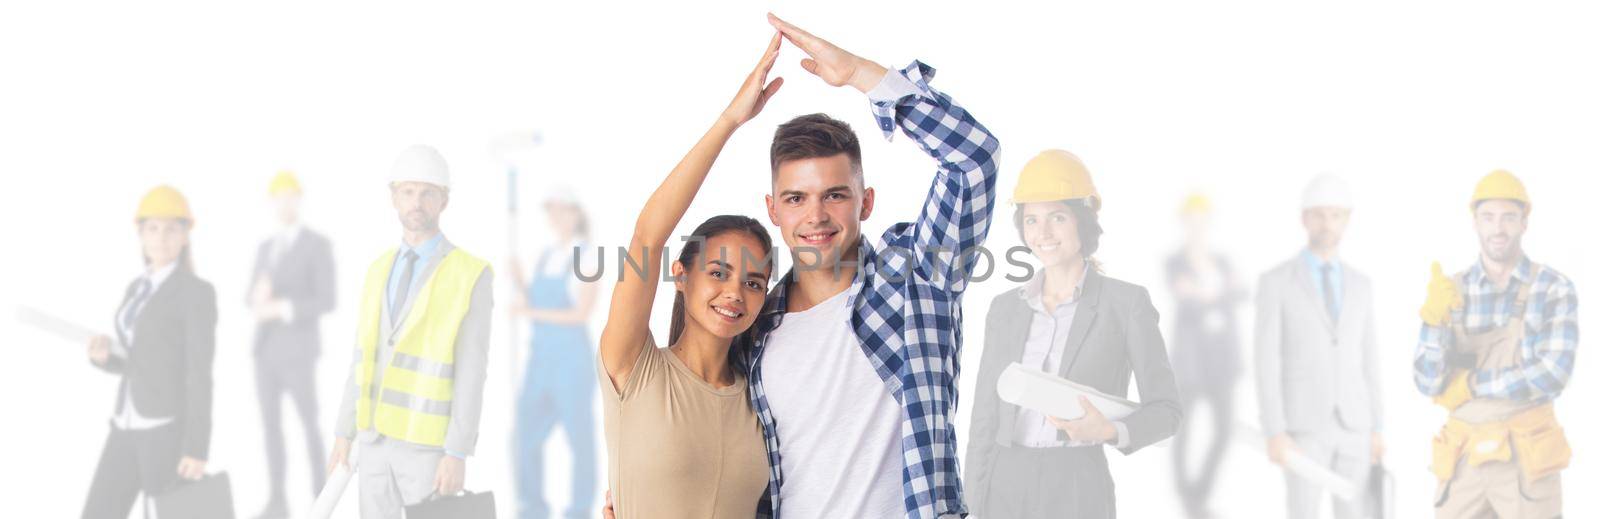 Couple making roof with hands by ALotOfPeople